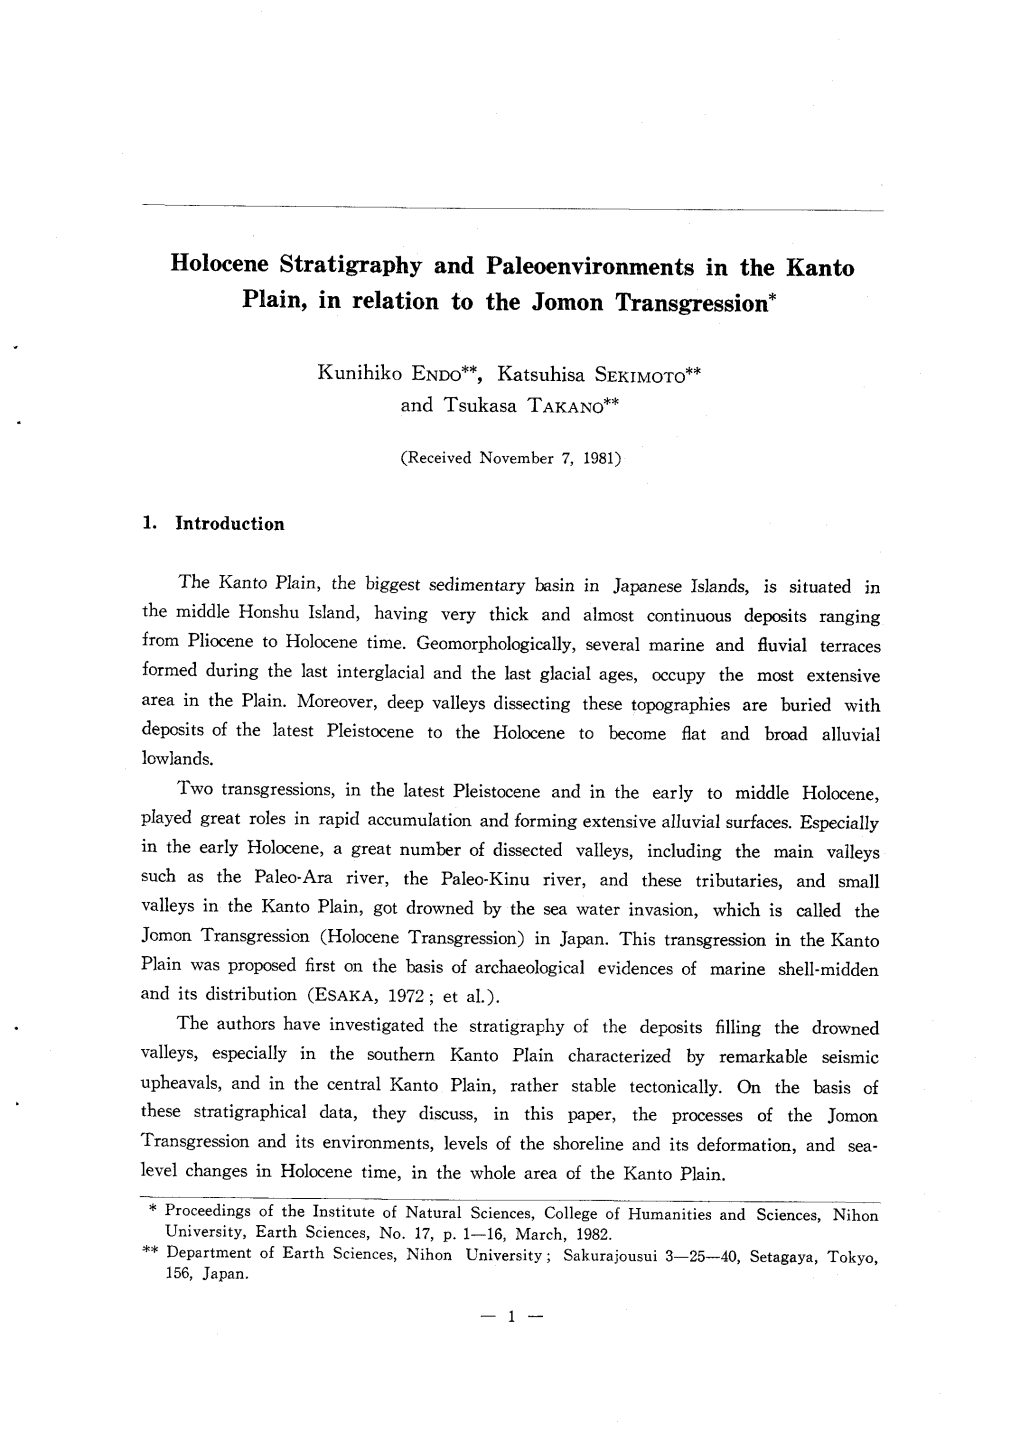 Holocene Stratigraphy and Paleoenvironments in the Kanto Plain